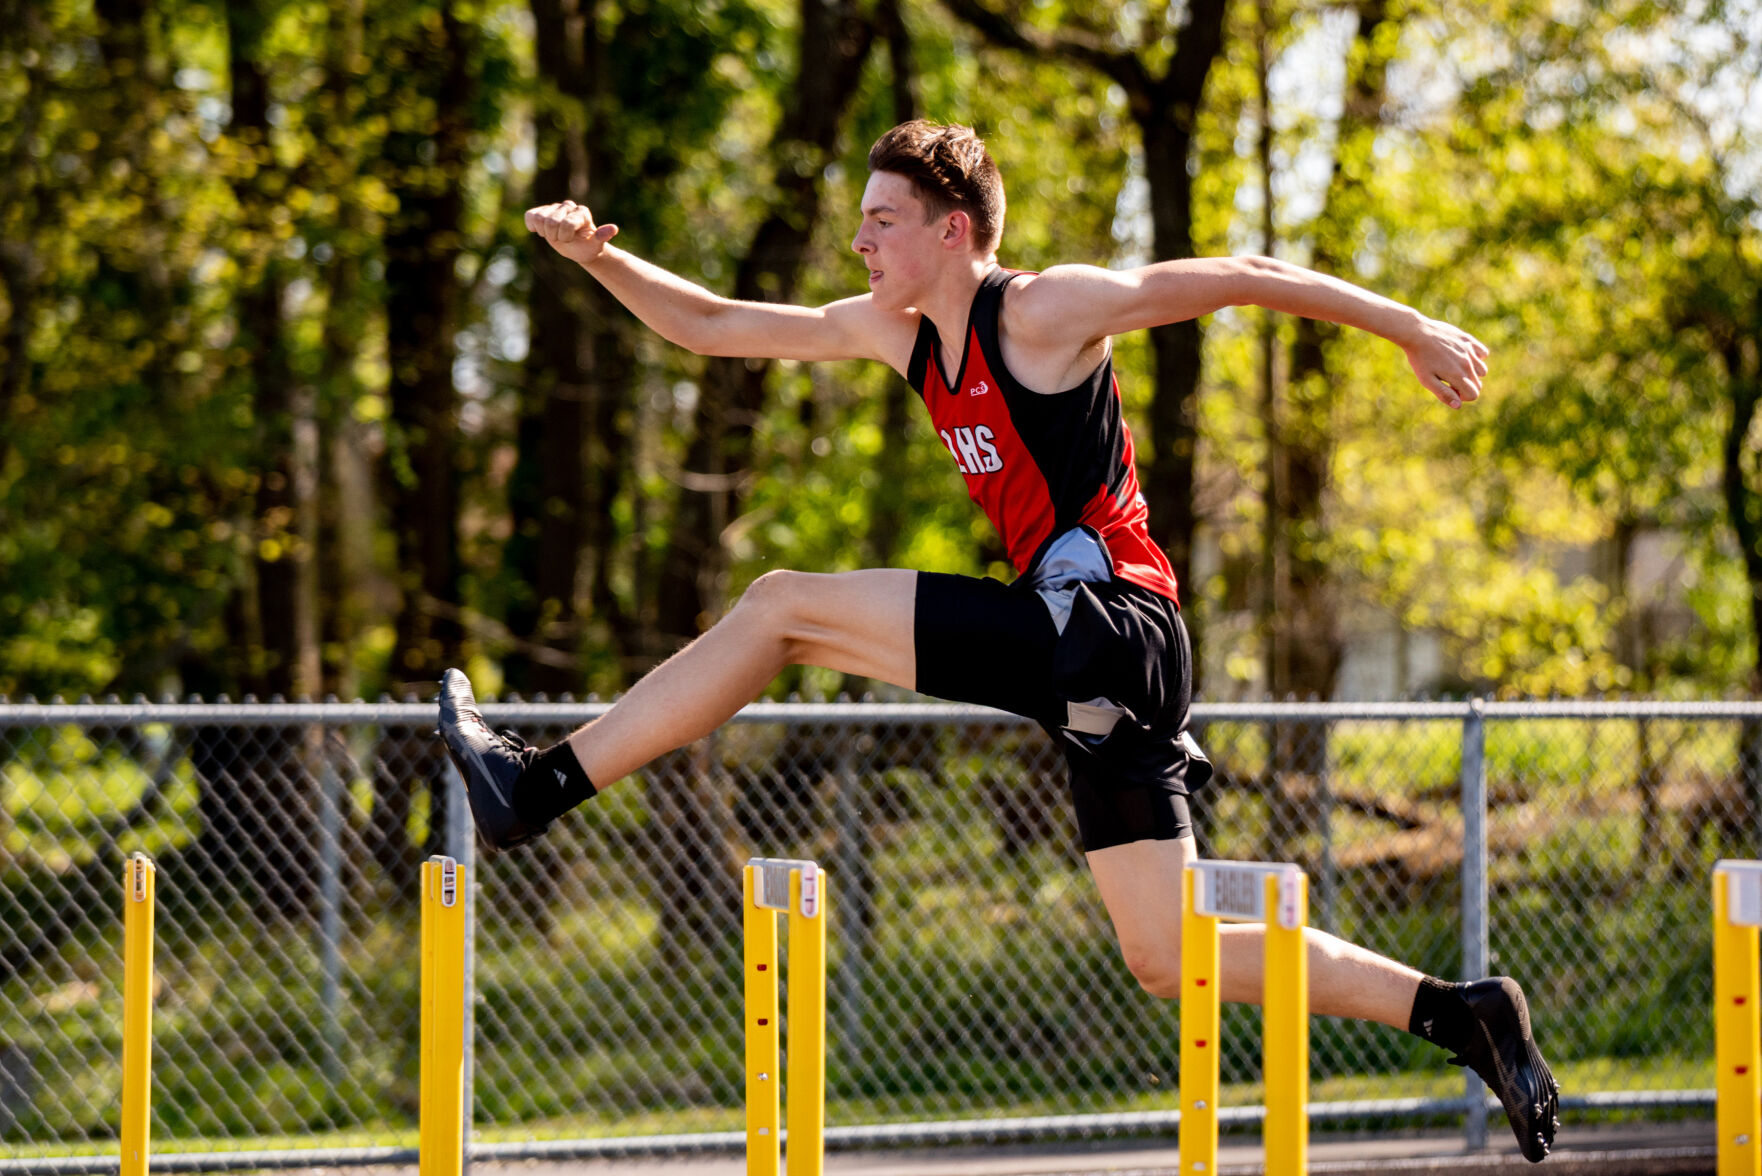 Track Teams Shine in Region 1 Dual Meet: Standout Performances and Sweeps Highlight Results